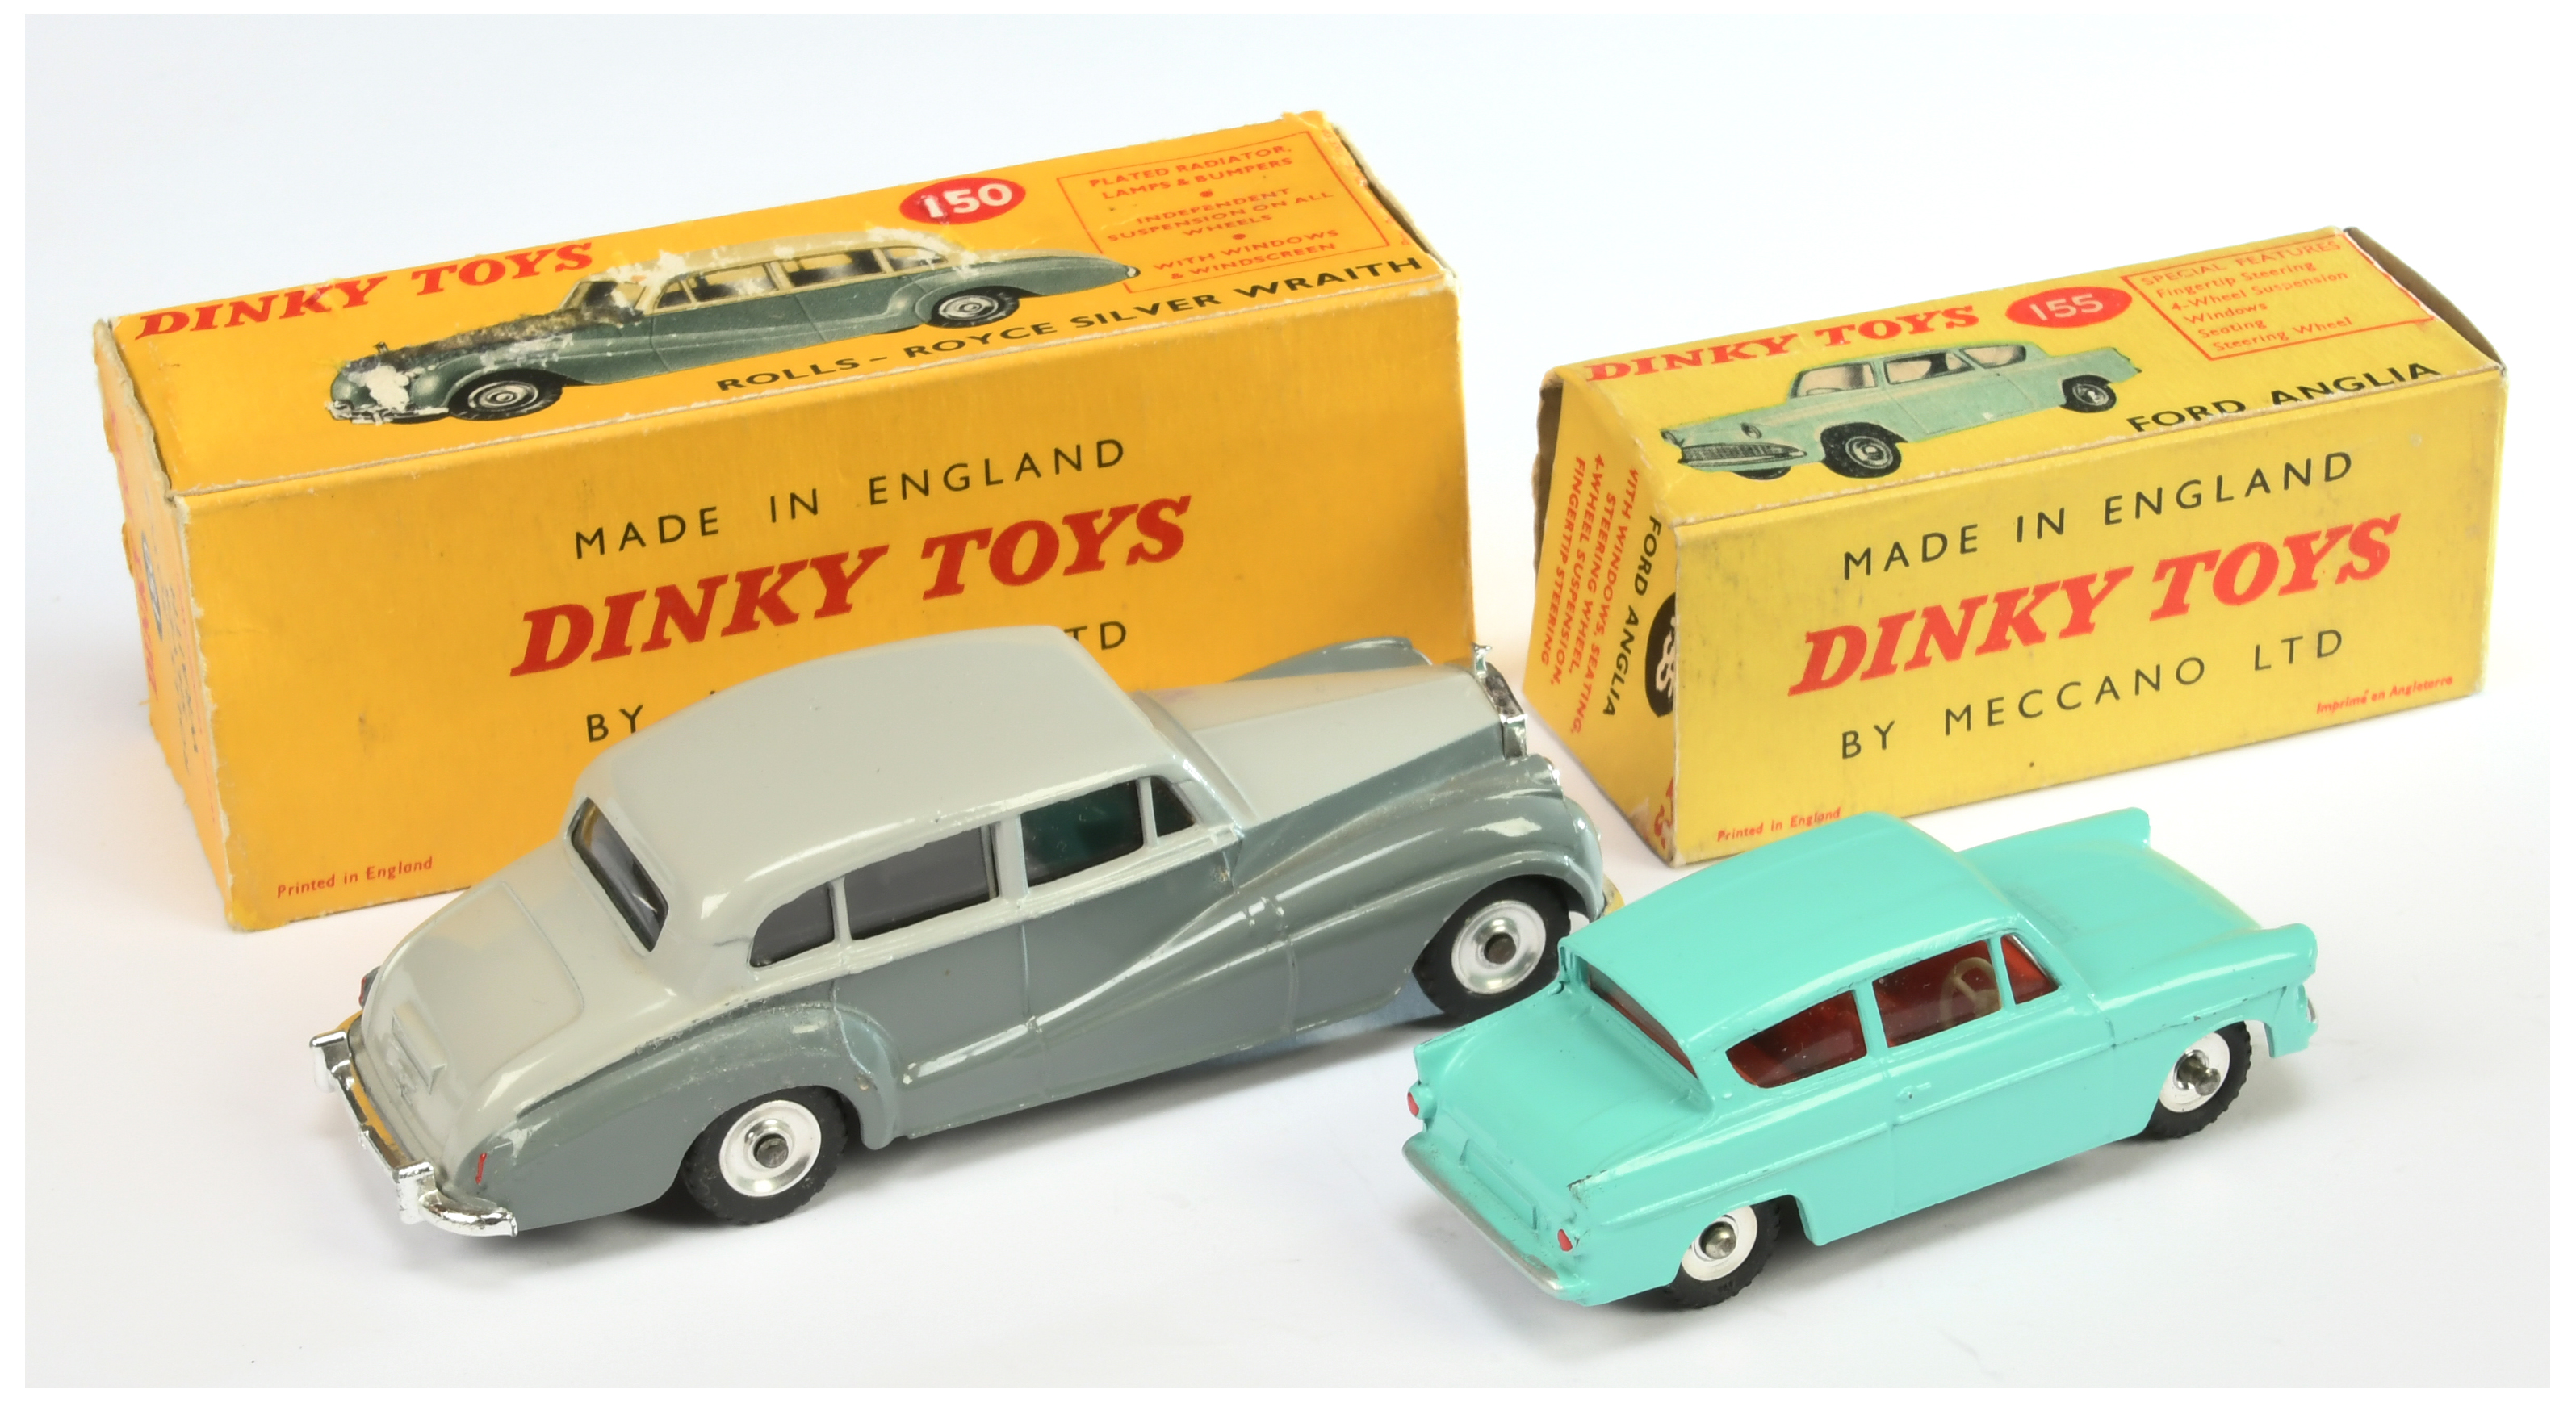 Dinky Toys 150 Rolls Royce Silver Wraith - Two-Tone Grey, chrome trim and spun hubs plus 155 Ford... - Image 2 of 2